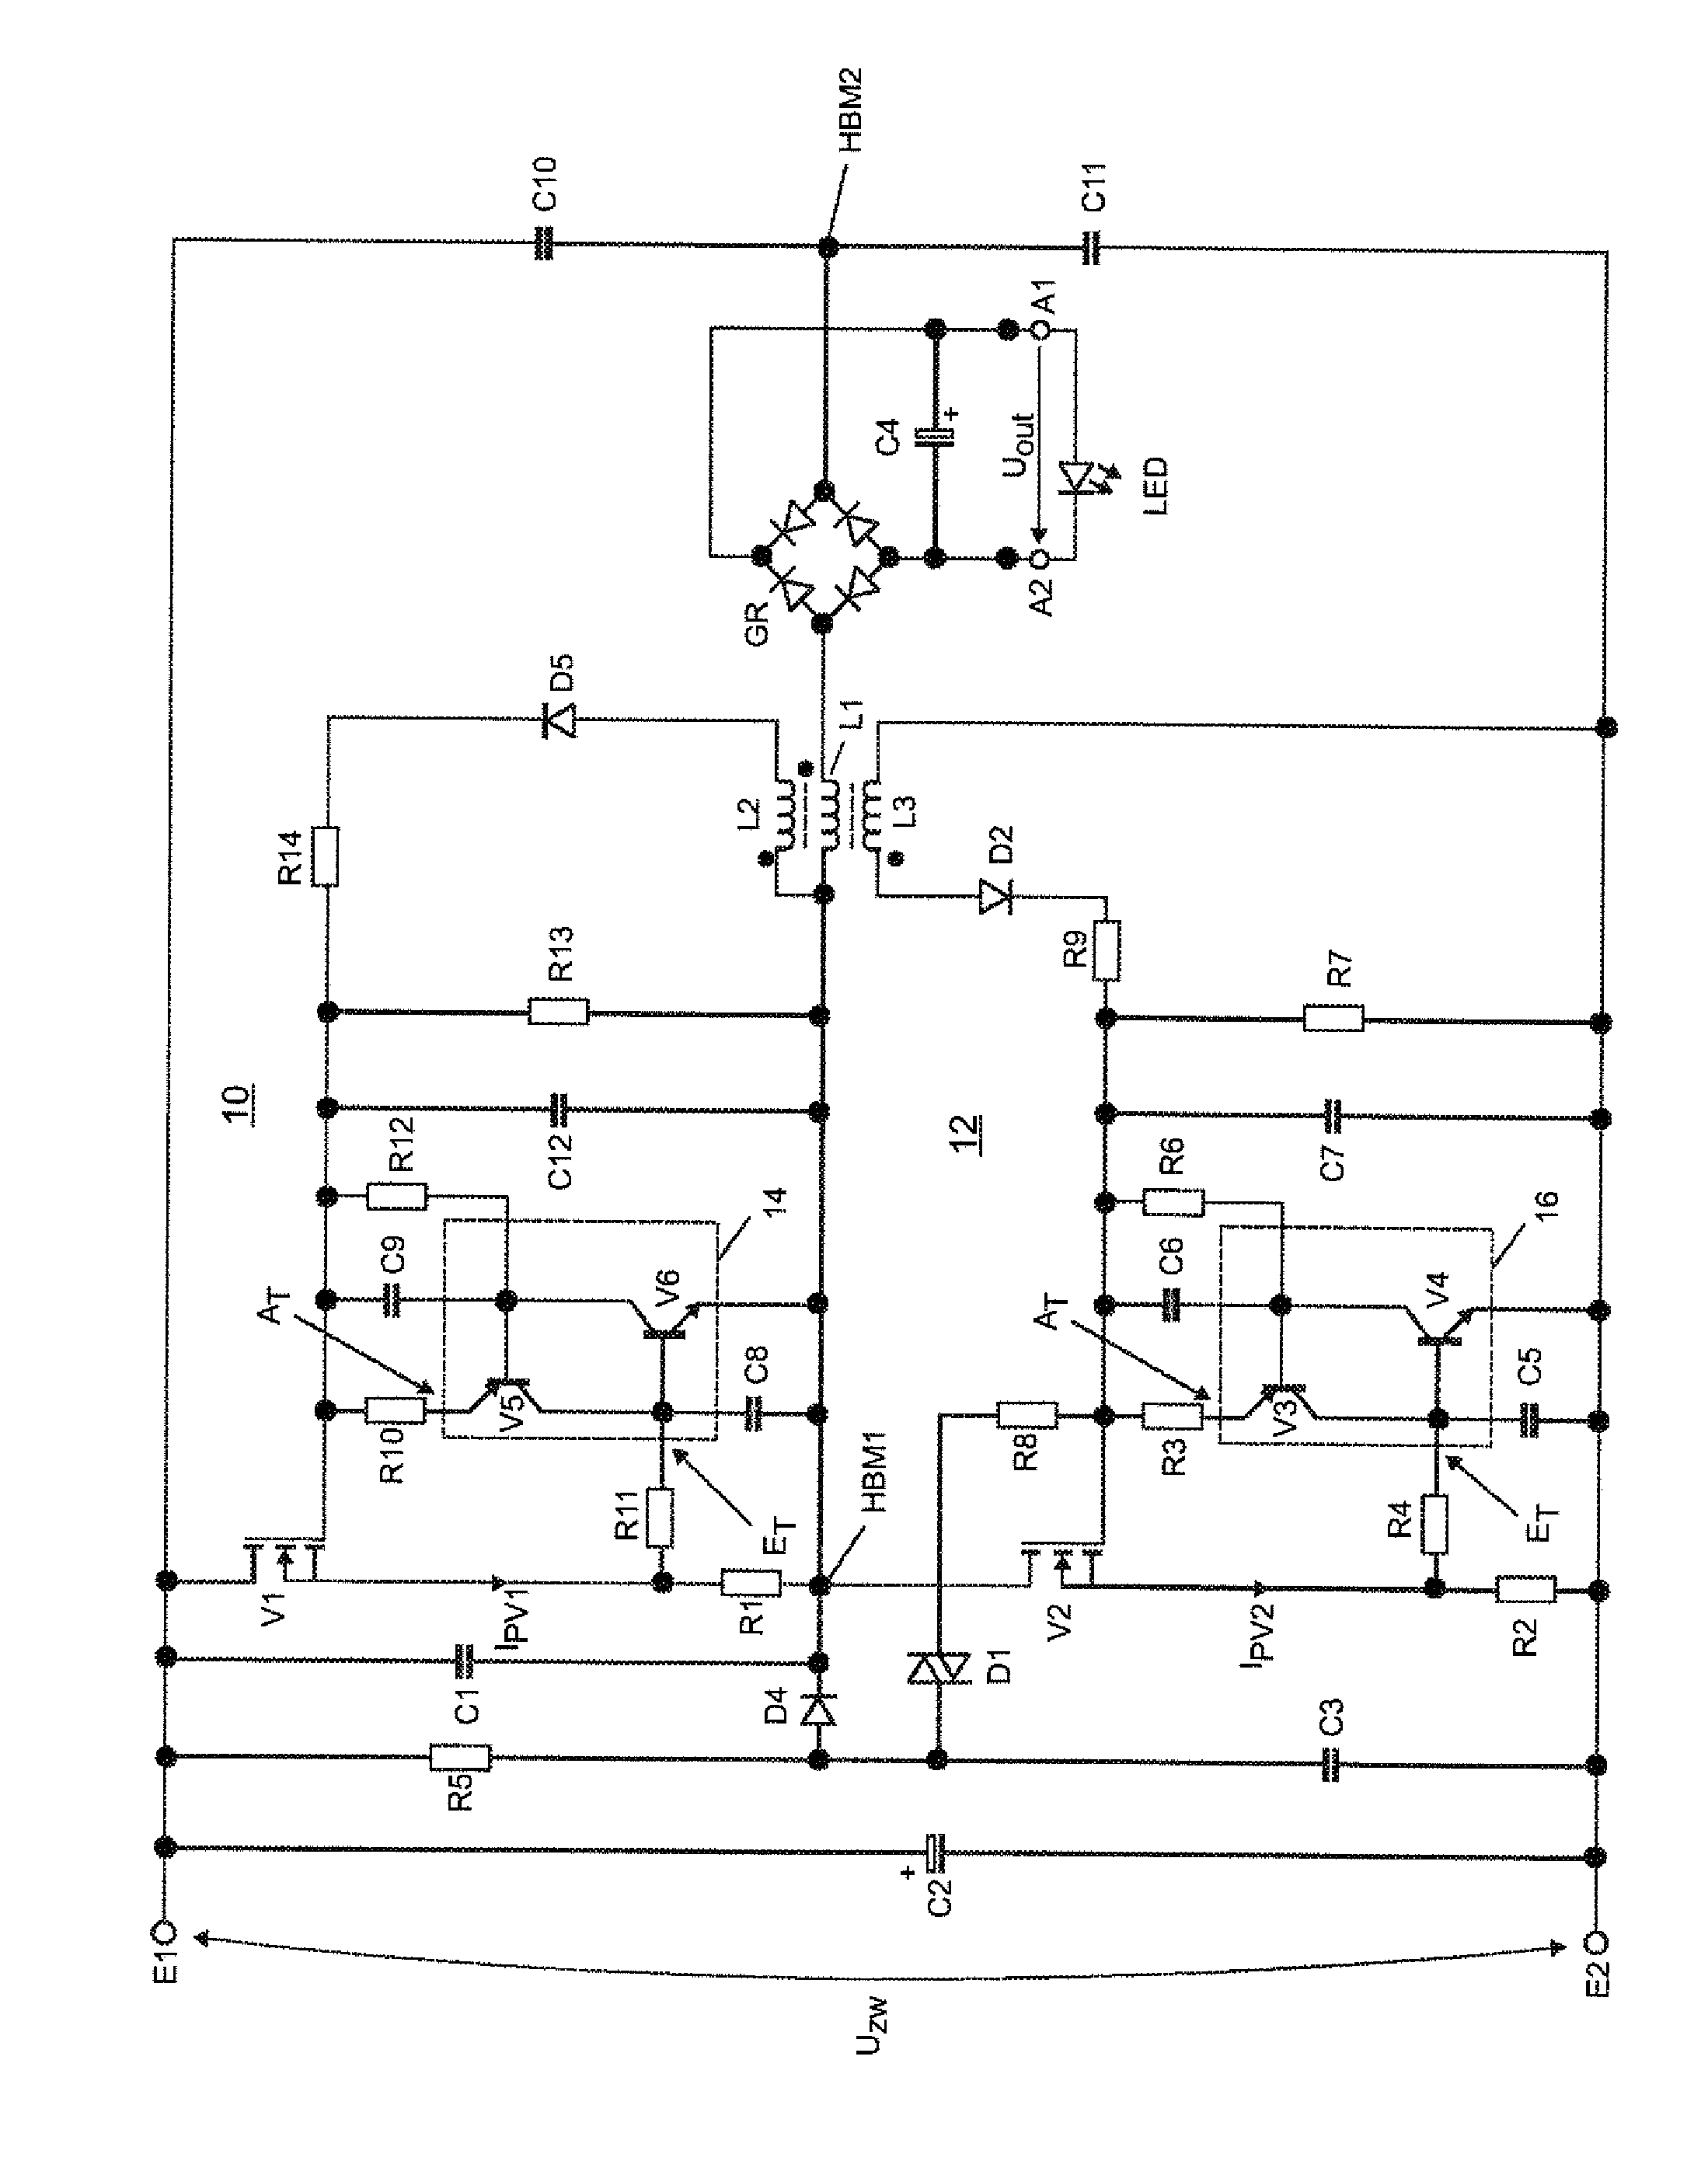 Circuit Arrangement for Operation of at Least One LED